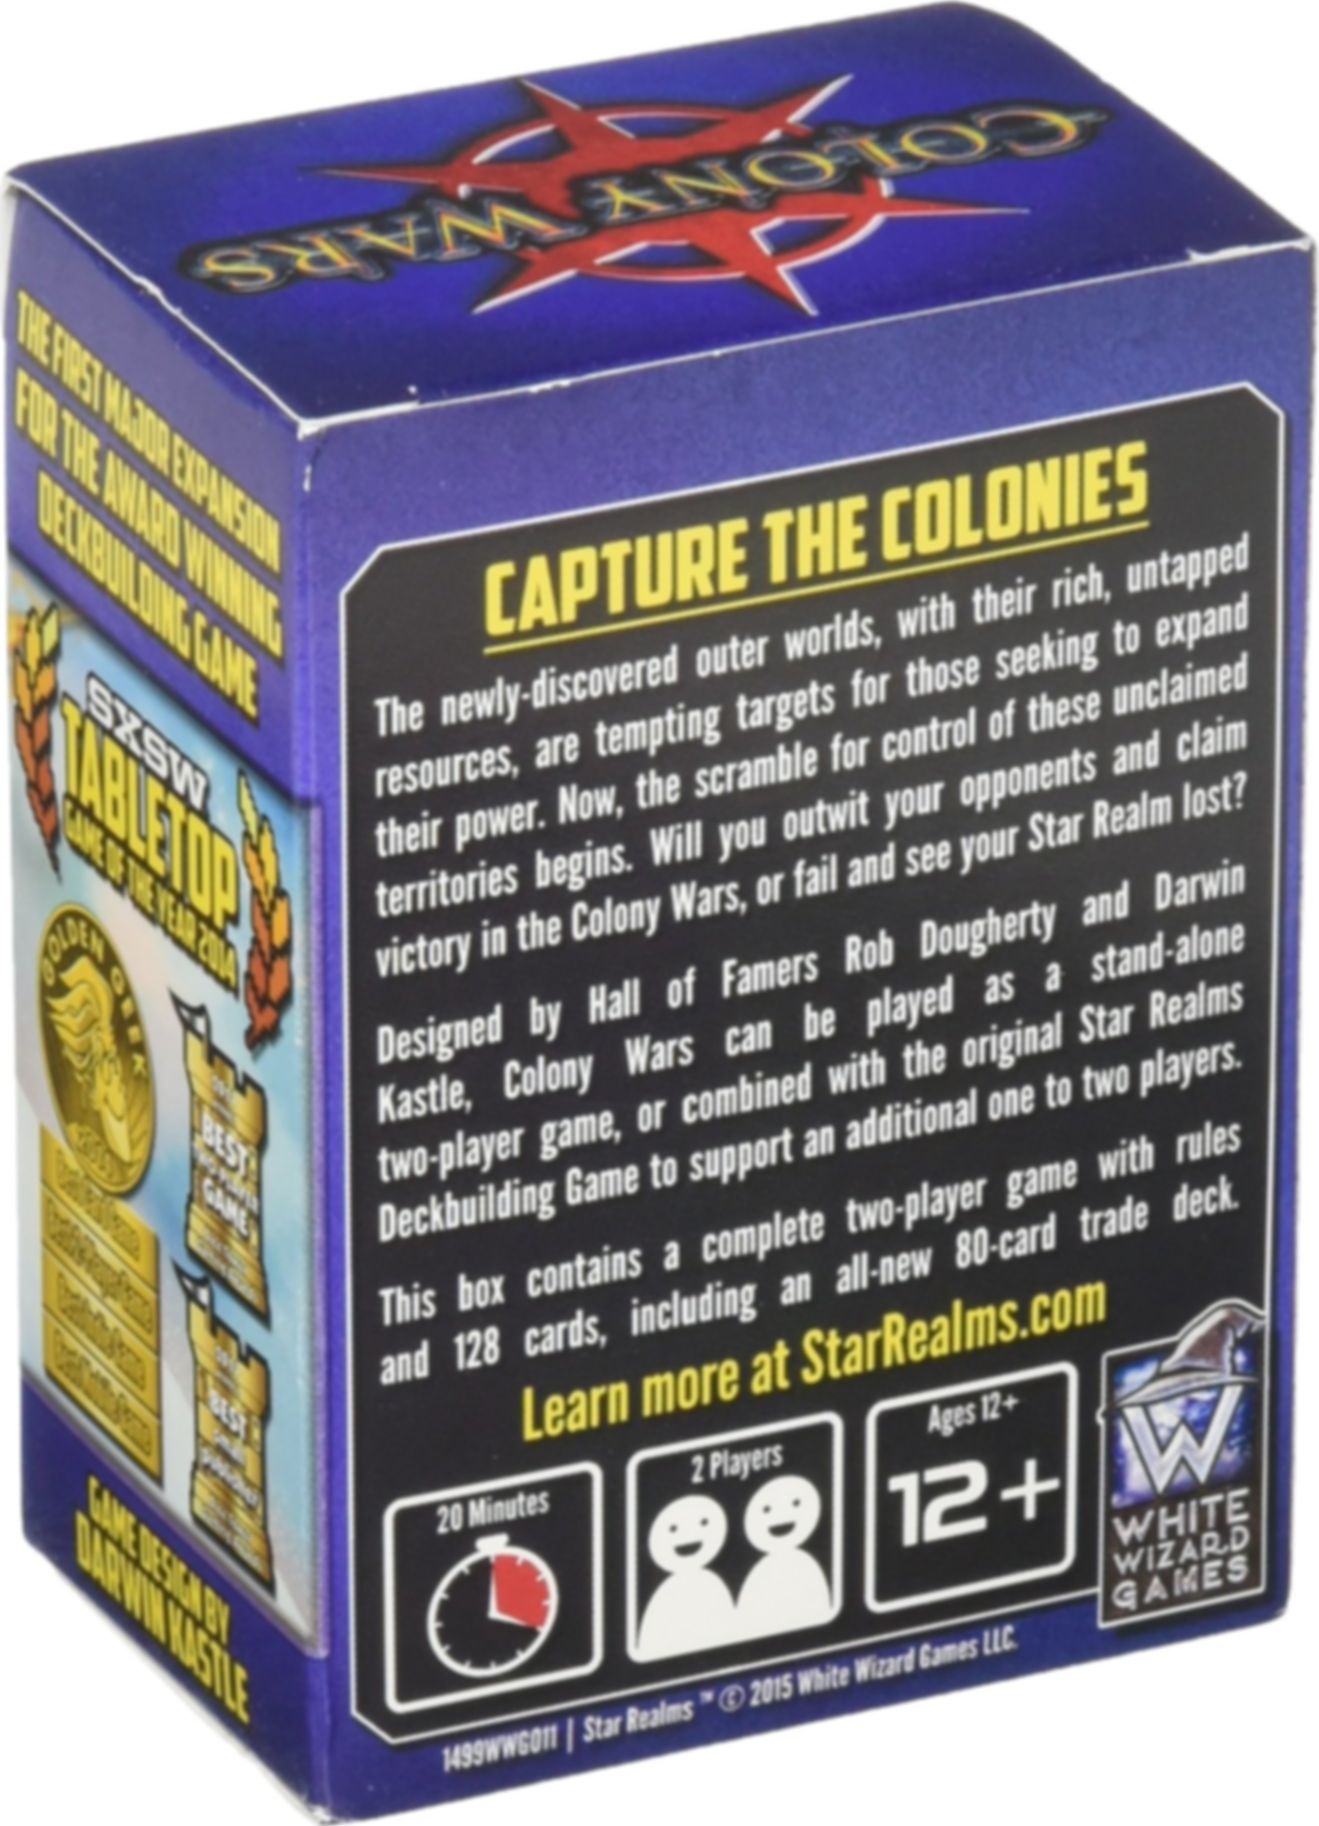 Star Realms: Colony Wars back of the box